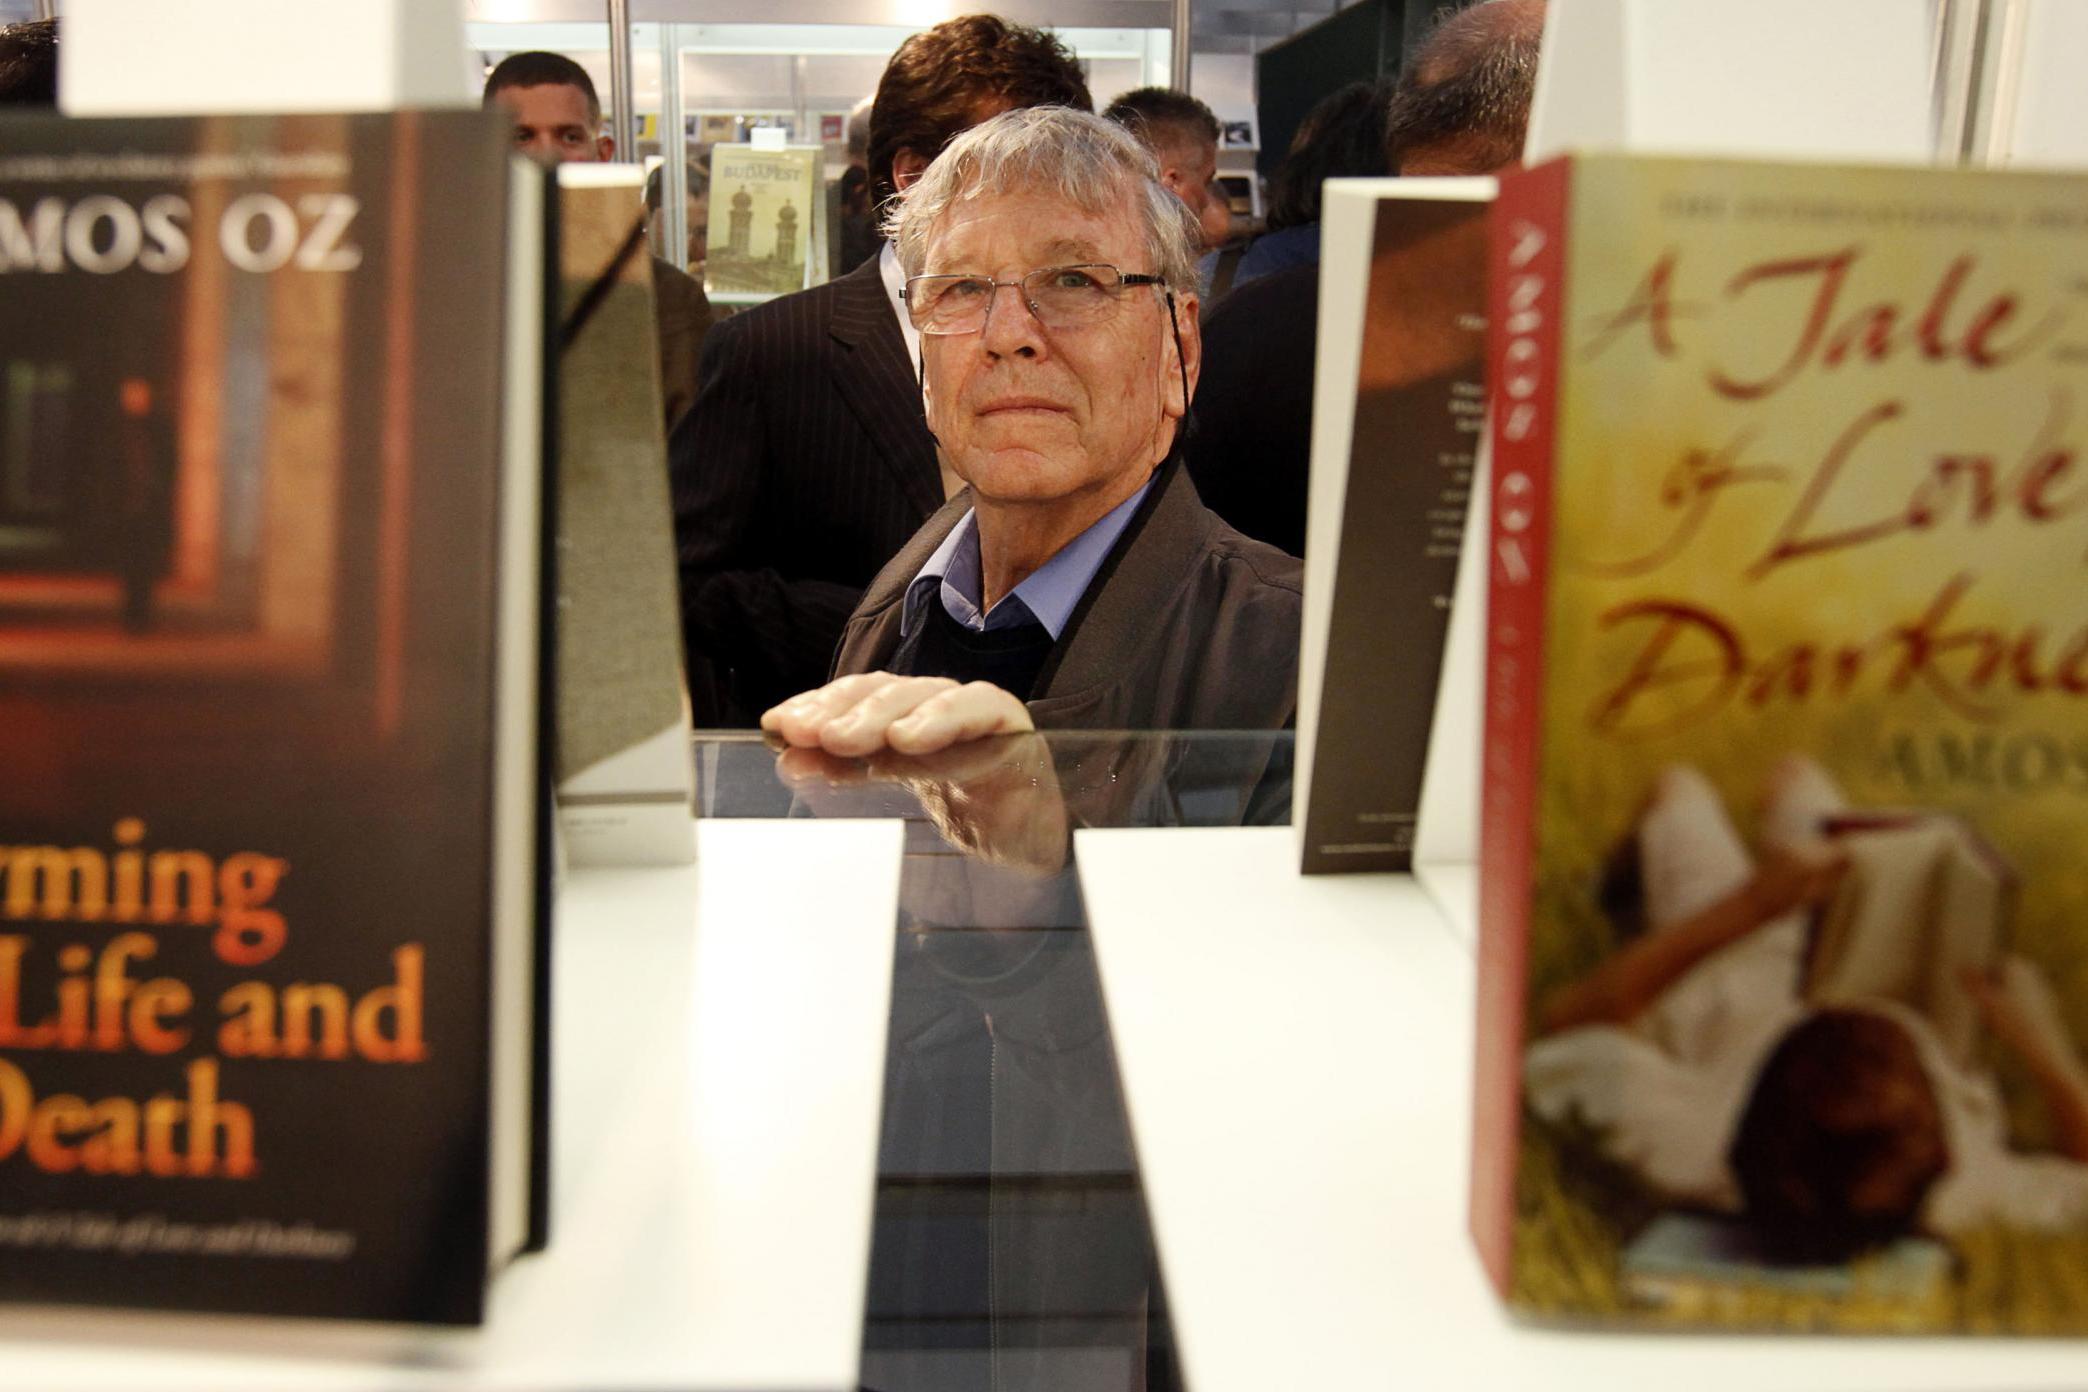 At the International Book Festival in Budapest in 2010